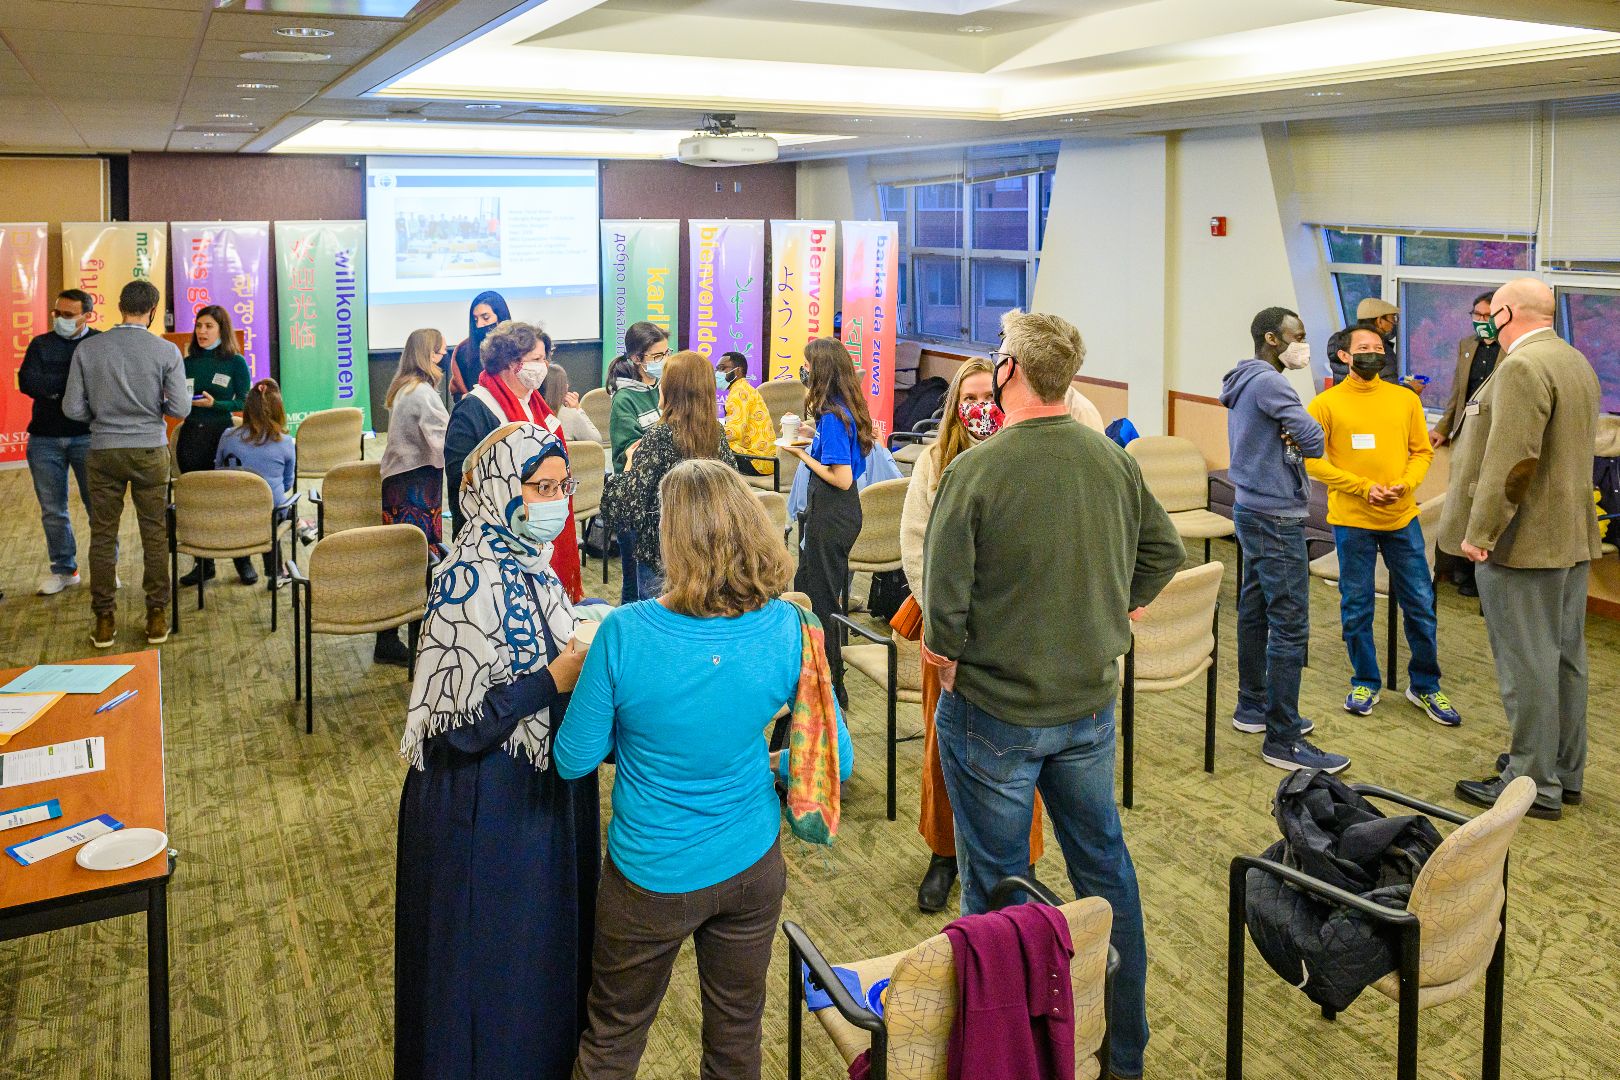 Open house participants connect with each other in the event space.